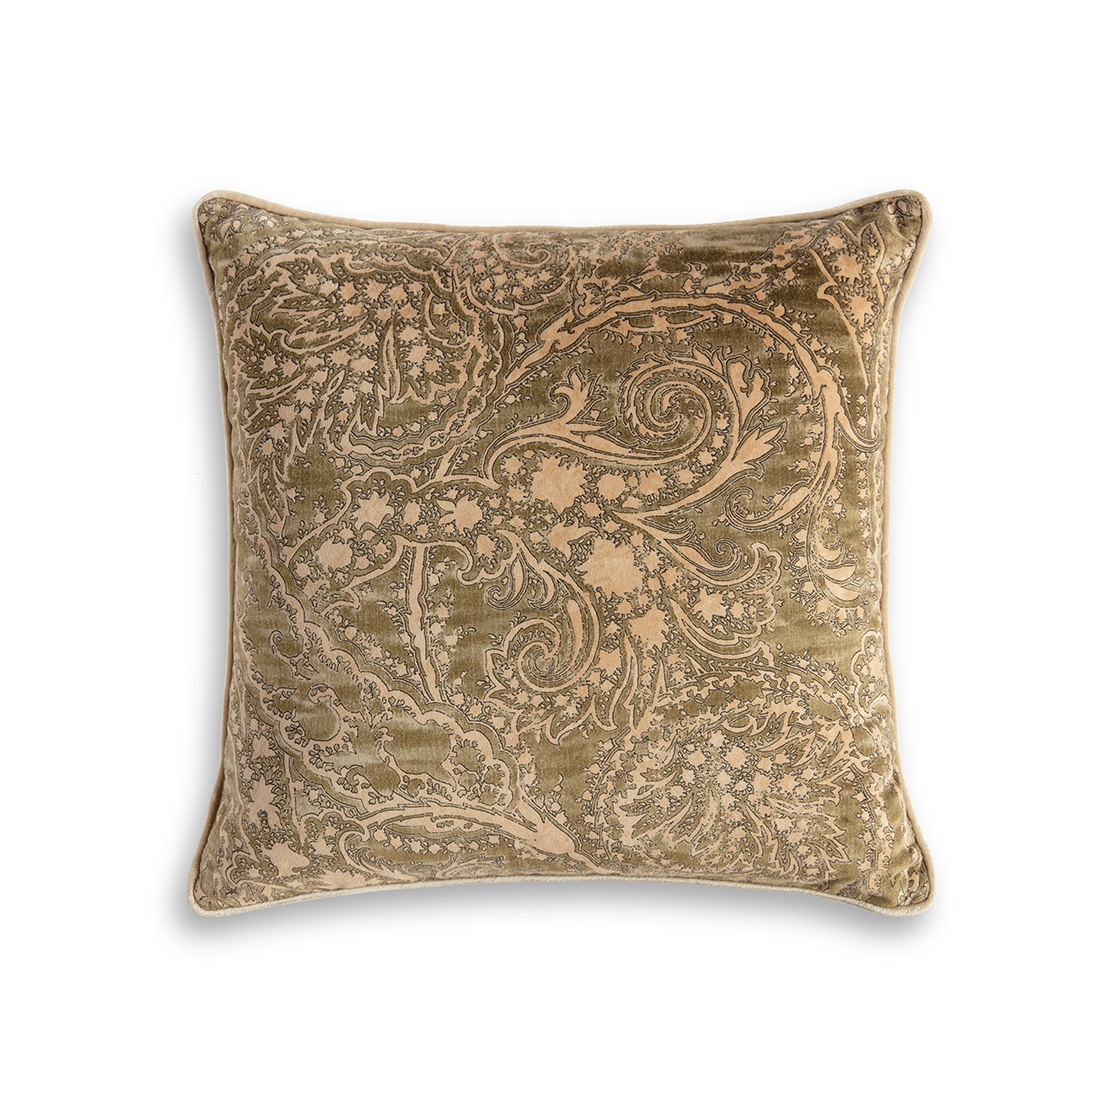 Balthazar - Laurel classic cushion with Como - Fern back and piping - Beaumont & Fletcher